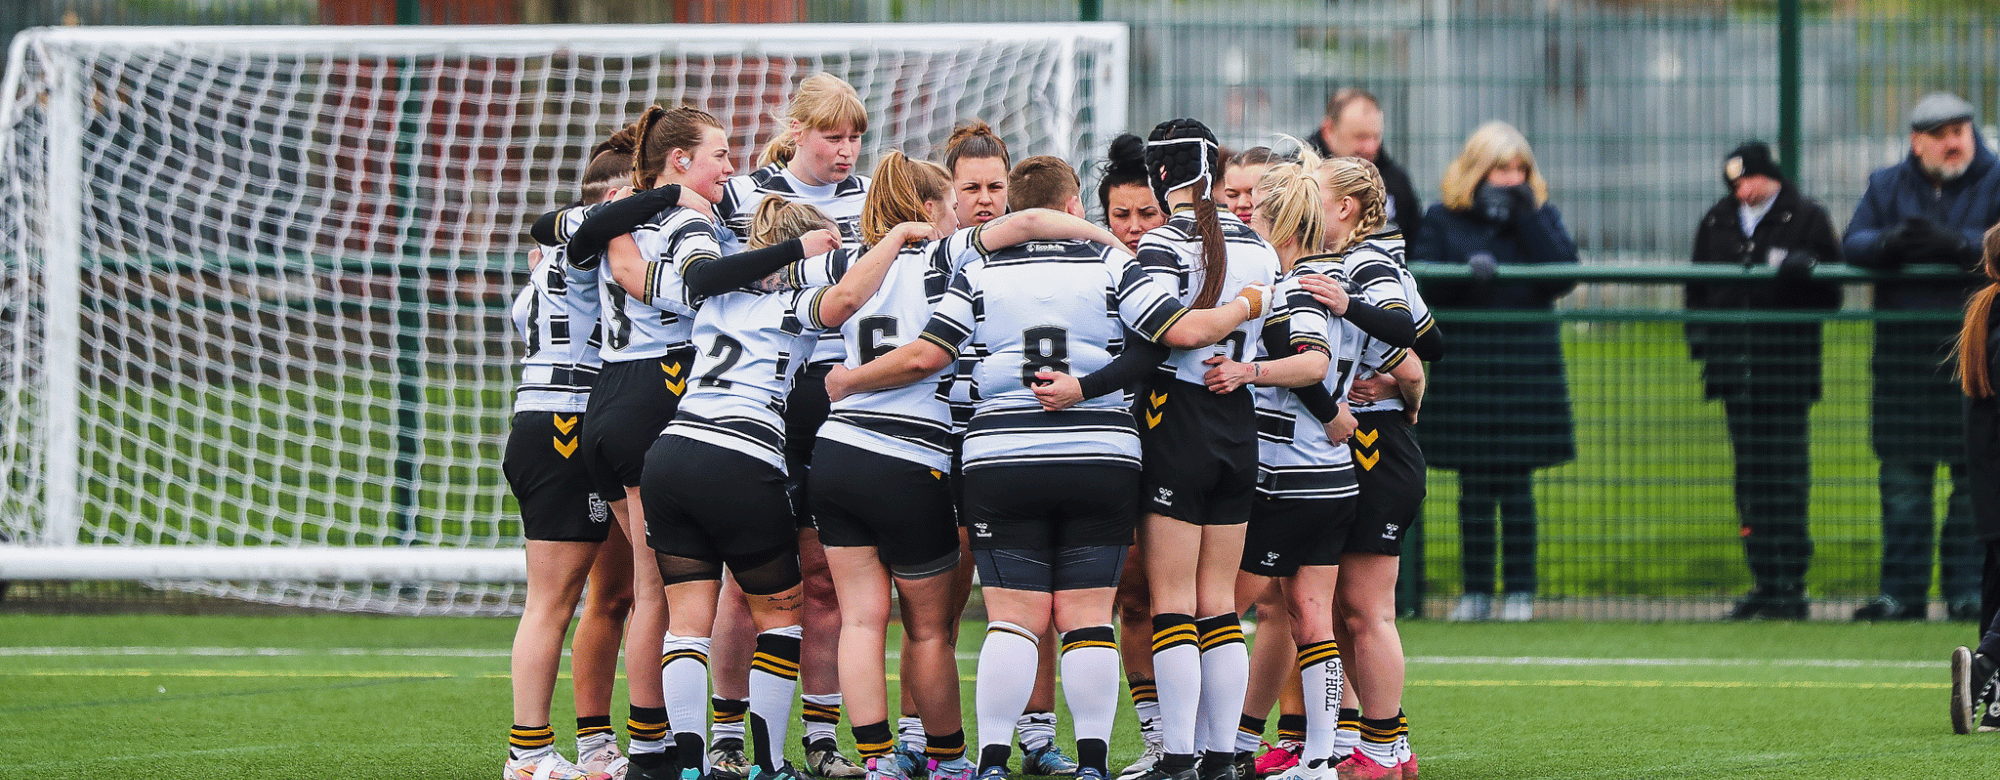 <strong>Women’s Coach Hill Pleased With Improvements</strong>